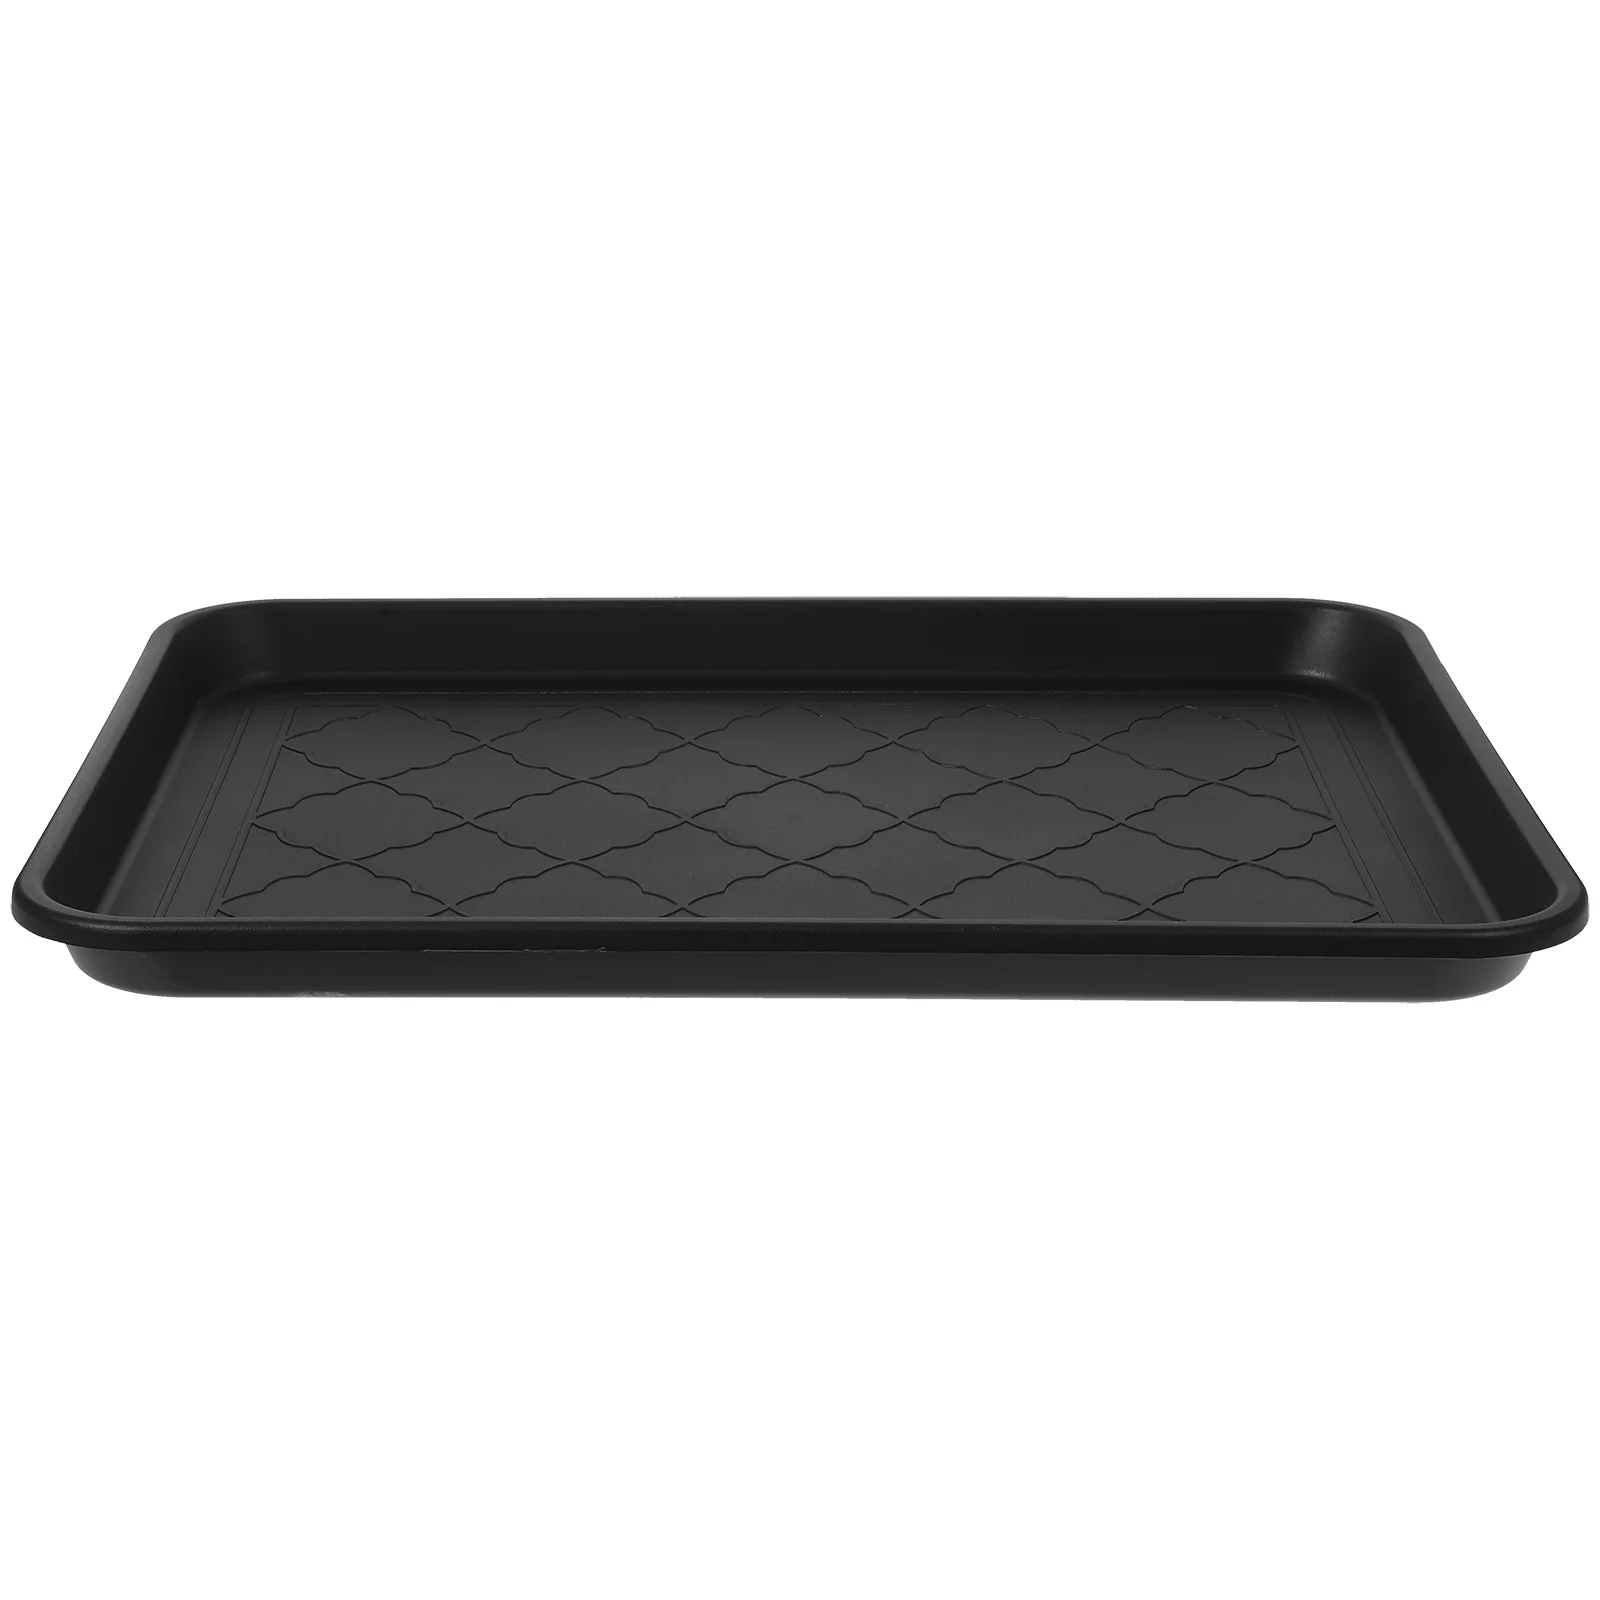 https://ae01.alicdn.com/kf/S8f9589dbaa4041578857588c339a67afn/Indoor-Shoe-Trays-Boots-Shoes-Storage-Plate-Mats-Entryway-Small-Sundries-Plastic-Plants.jpg